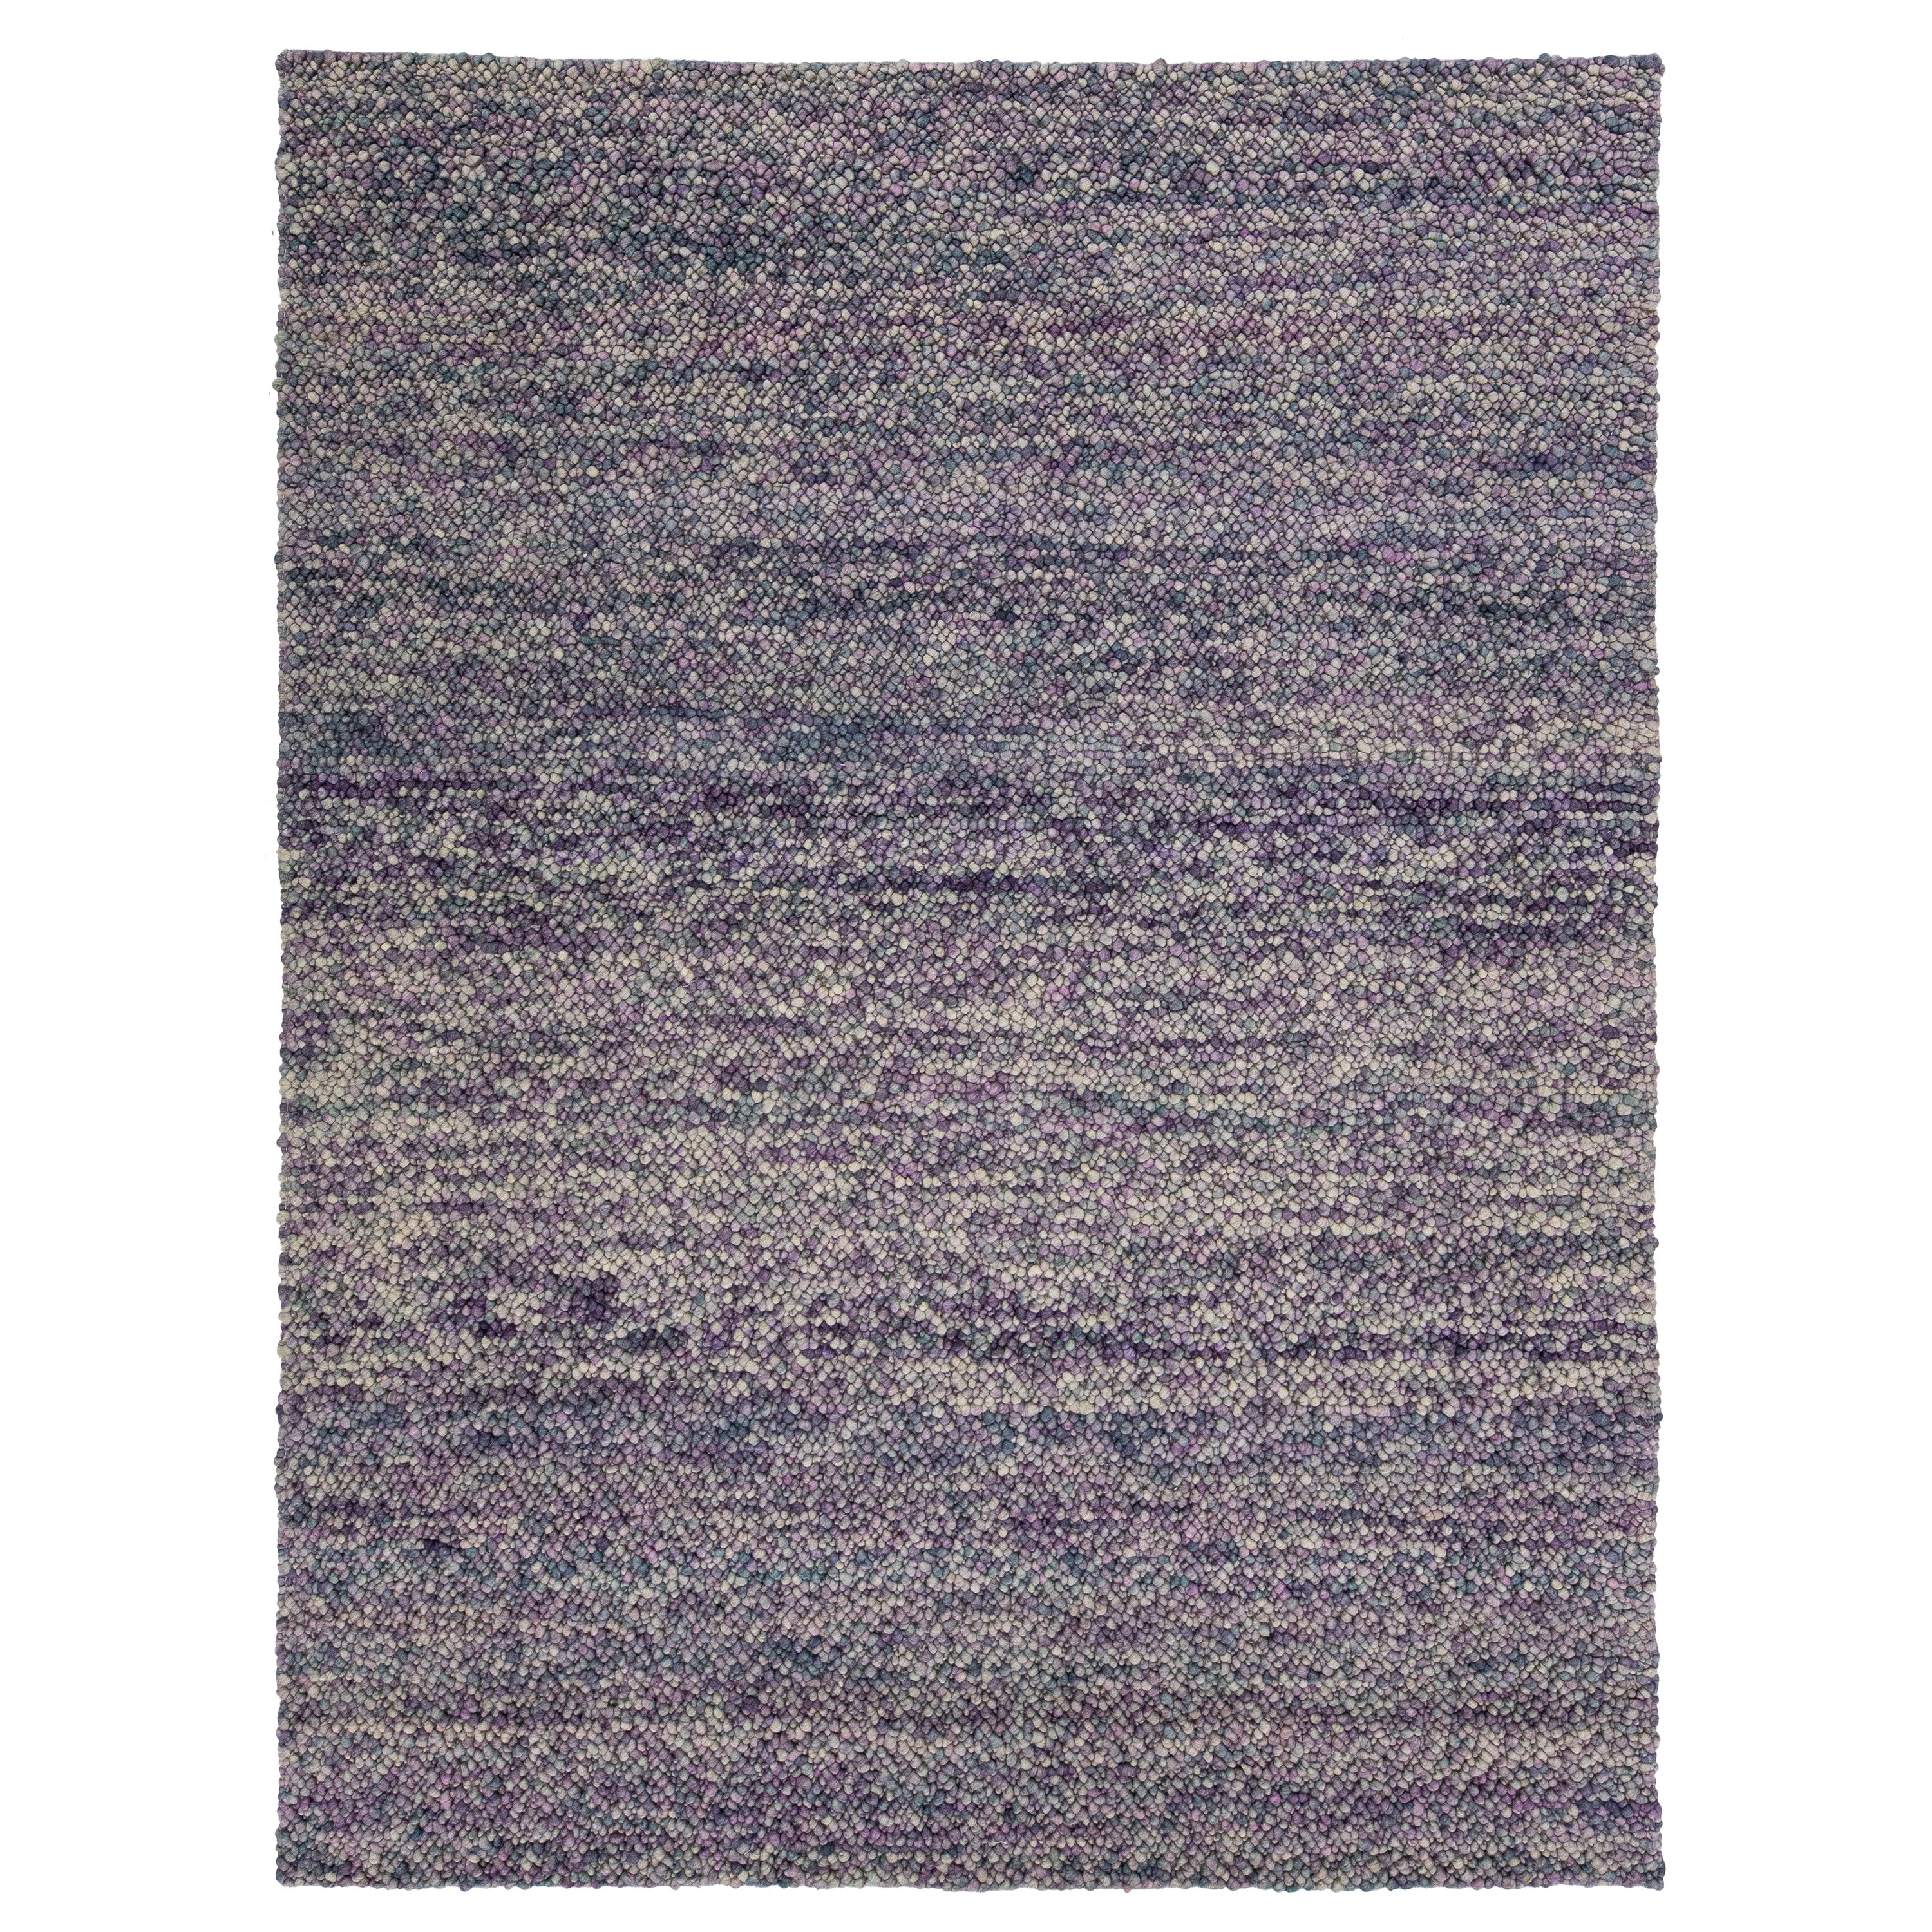 Contemporary Texture Wool Rug Handmade with Purple and Blue Allover Design